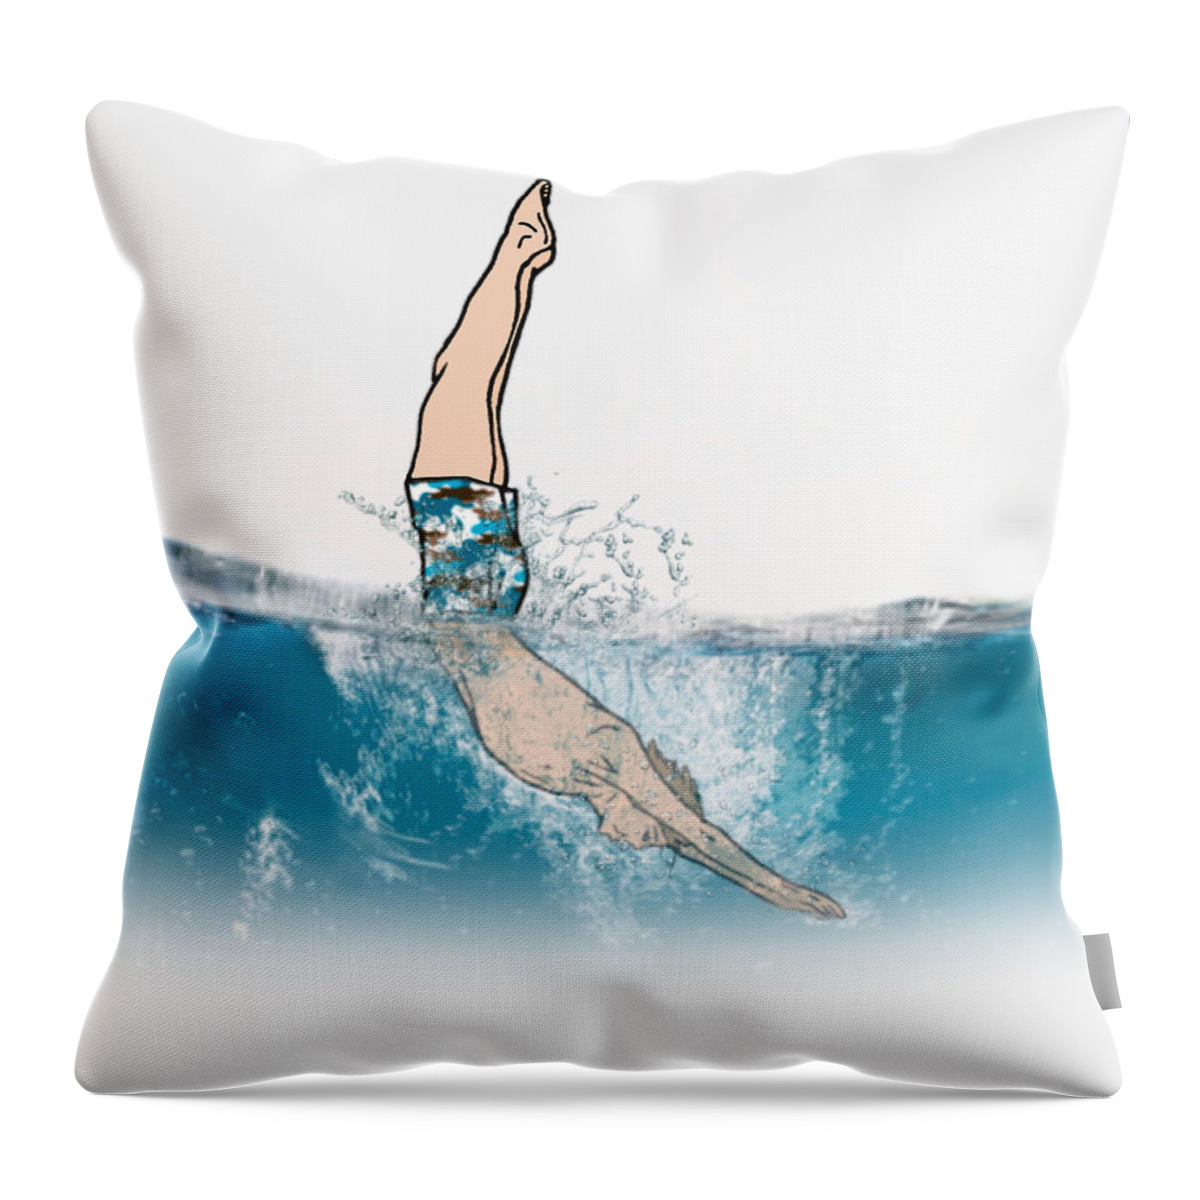 Swimming Throw Pillow featuring the digital art The Dive by Kelly Mills